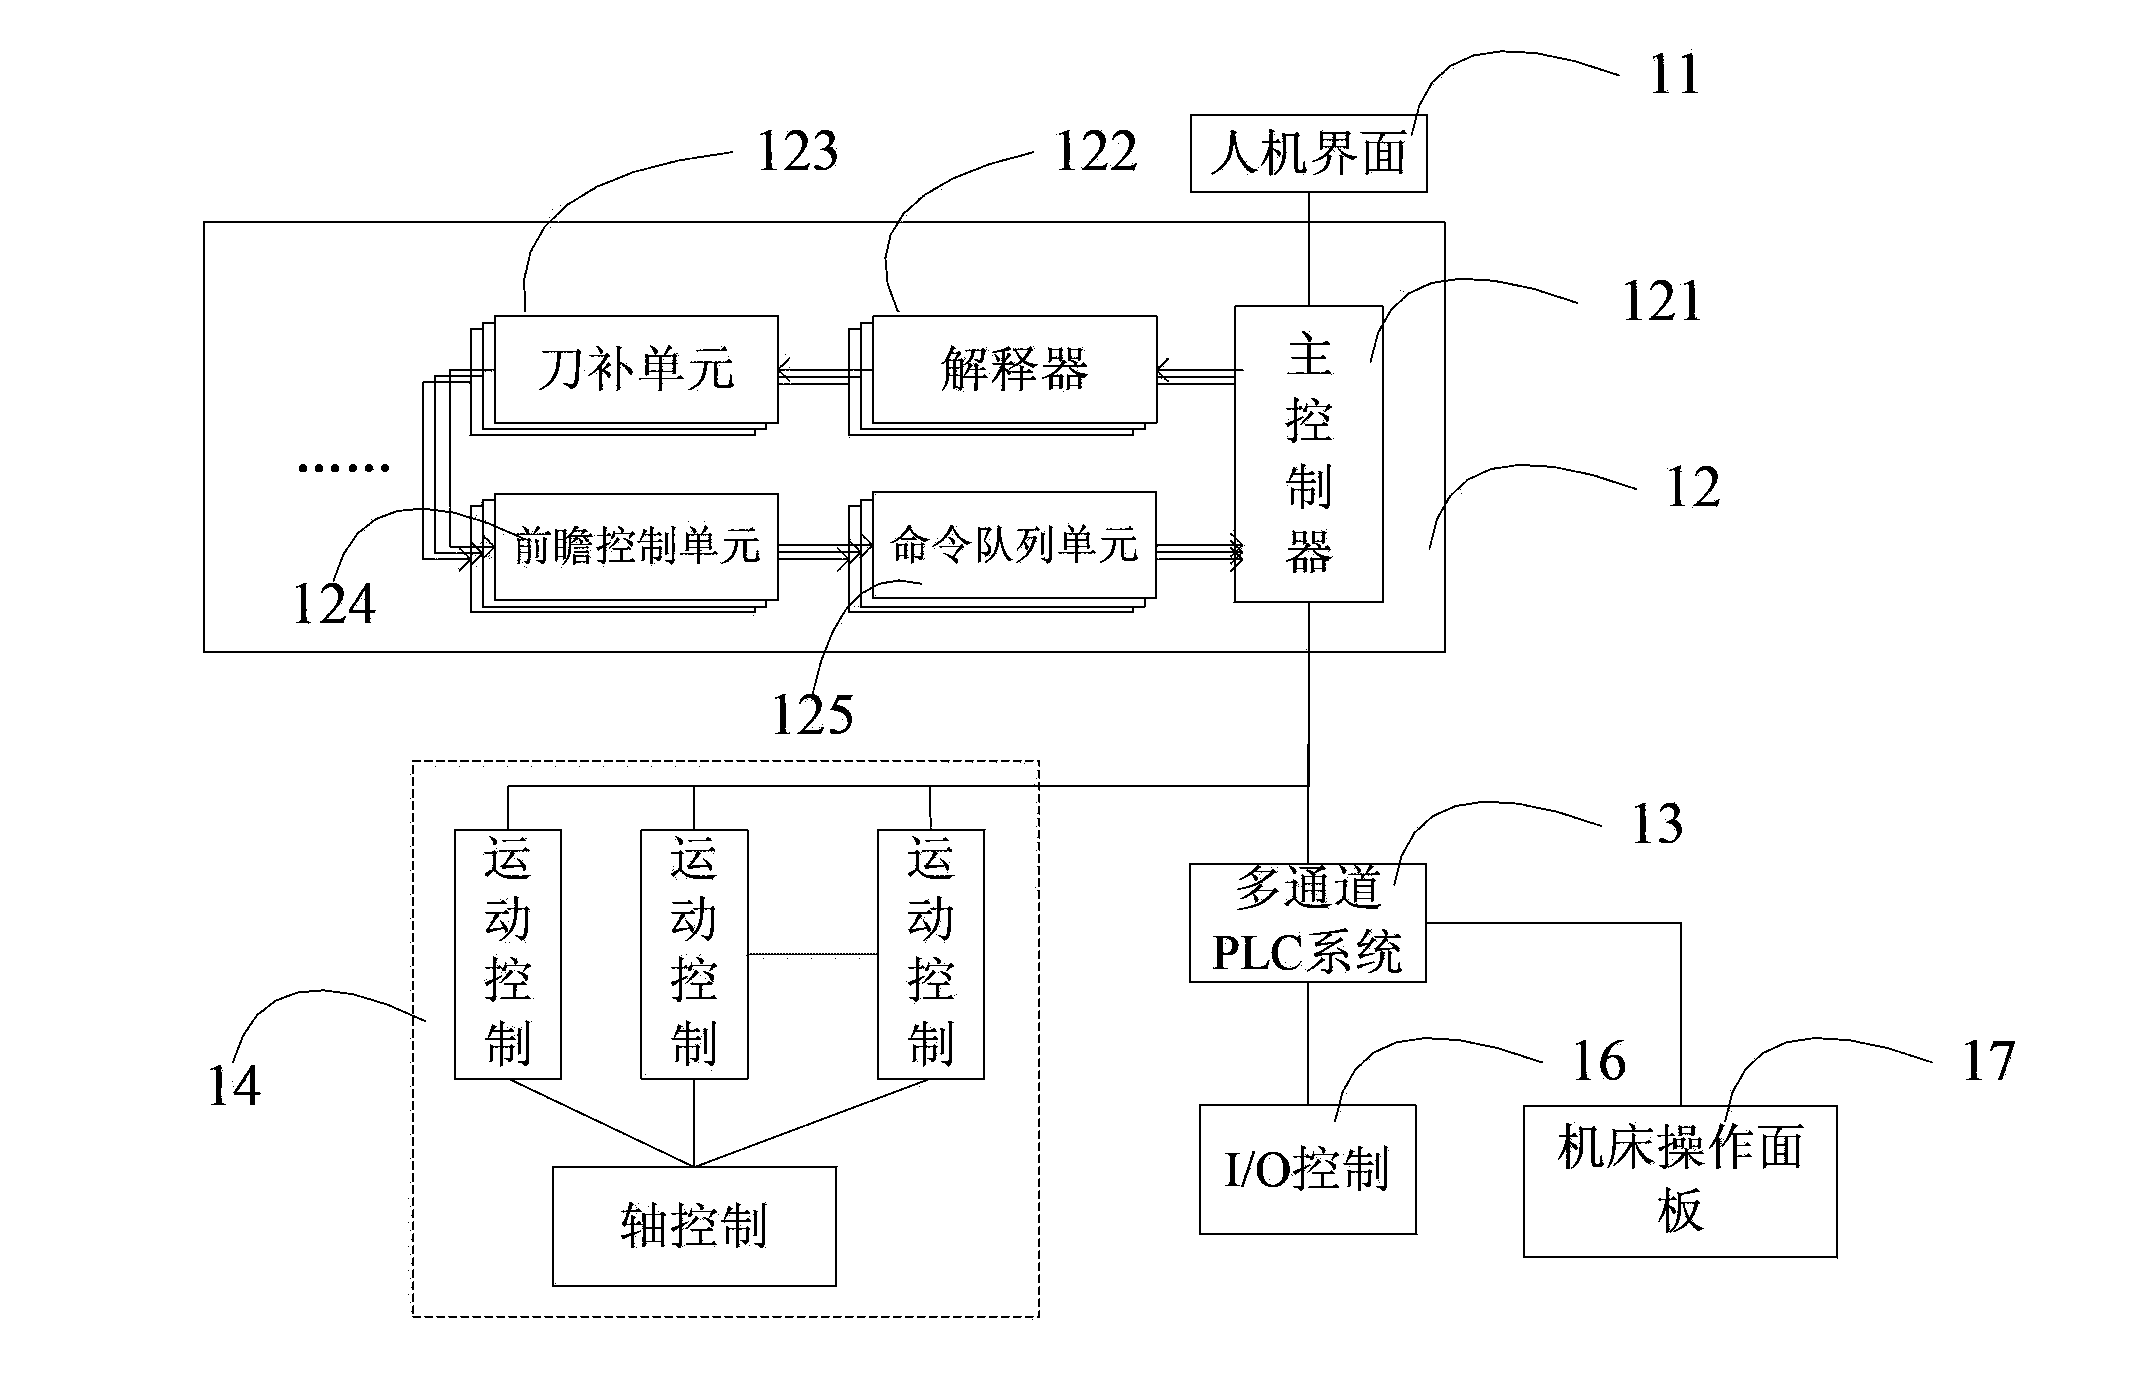 Multi-channel numerical control system and multi-channel control method thereof